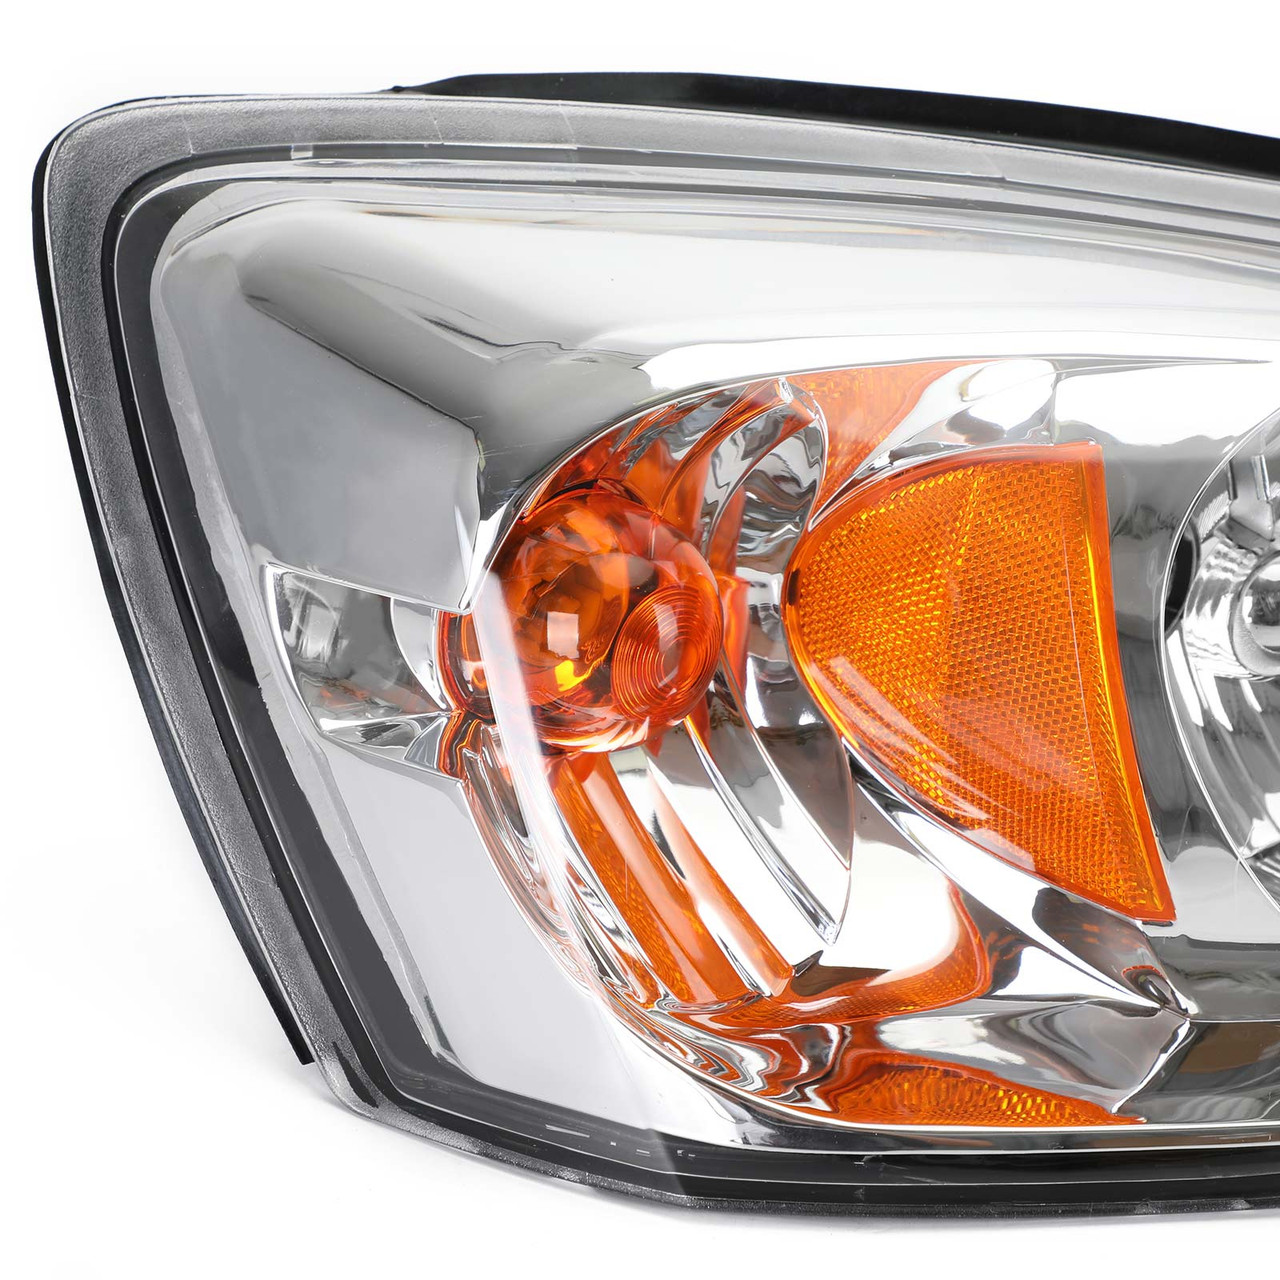 Chrome Housing Clear Amber Headlights Assembly For Chevr Malibu 2004-2008